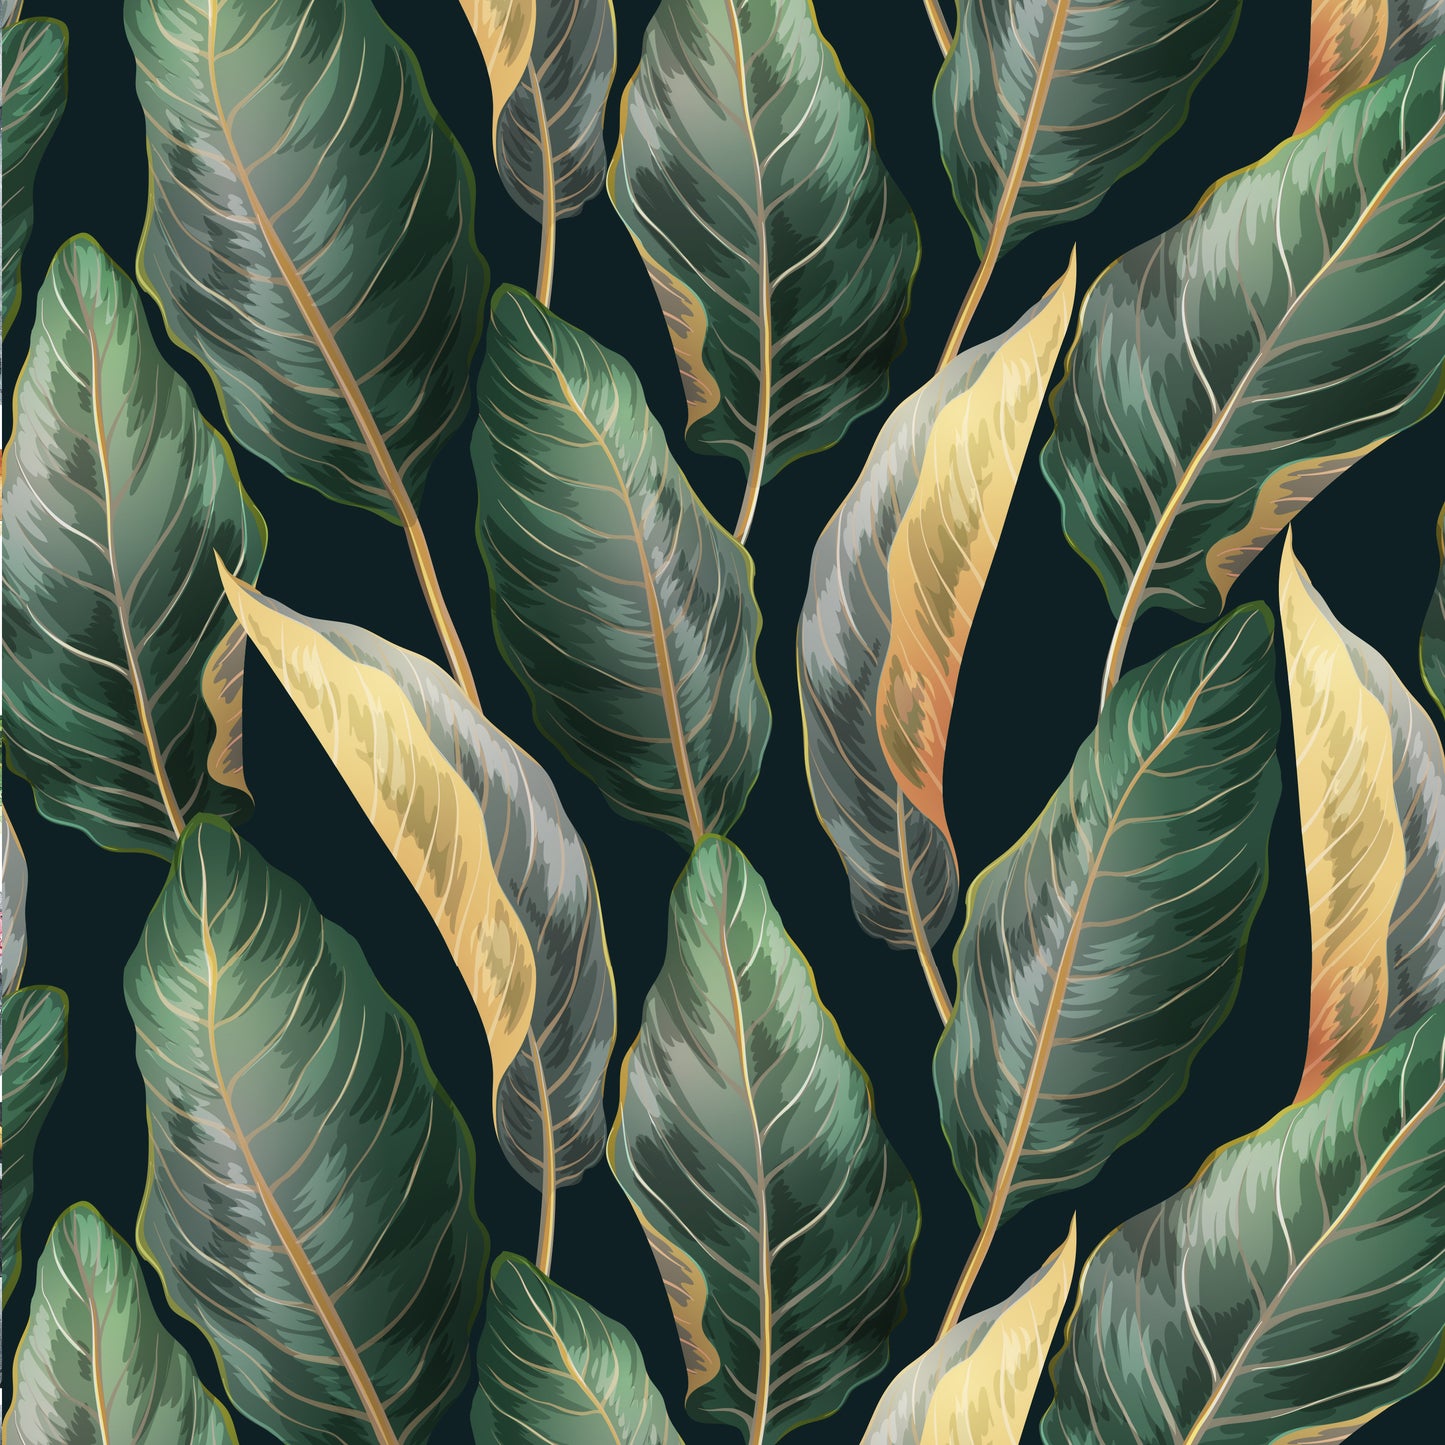 Dark Tropical Removable Peel And Stick Wallpaper